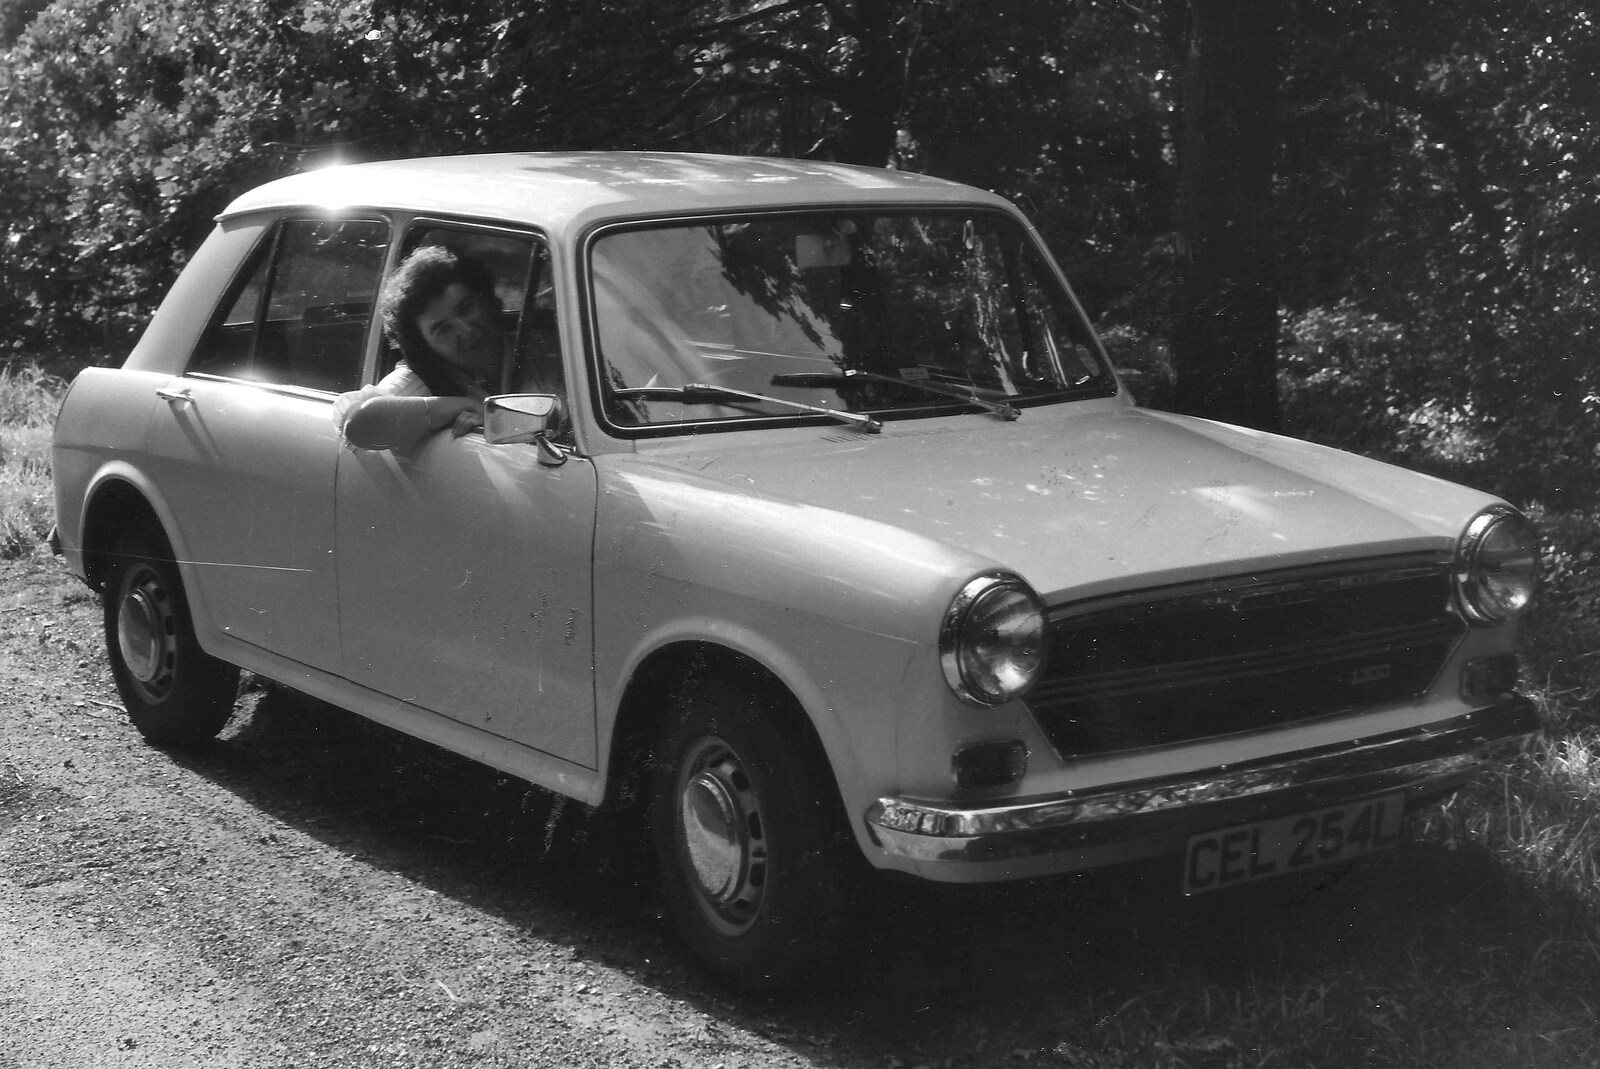 Liz in her Morris 1300 on Meadow Way from Life in Ford Cottage and Barton on Sea, Hampshire - 2nd April 1985